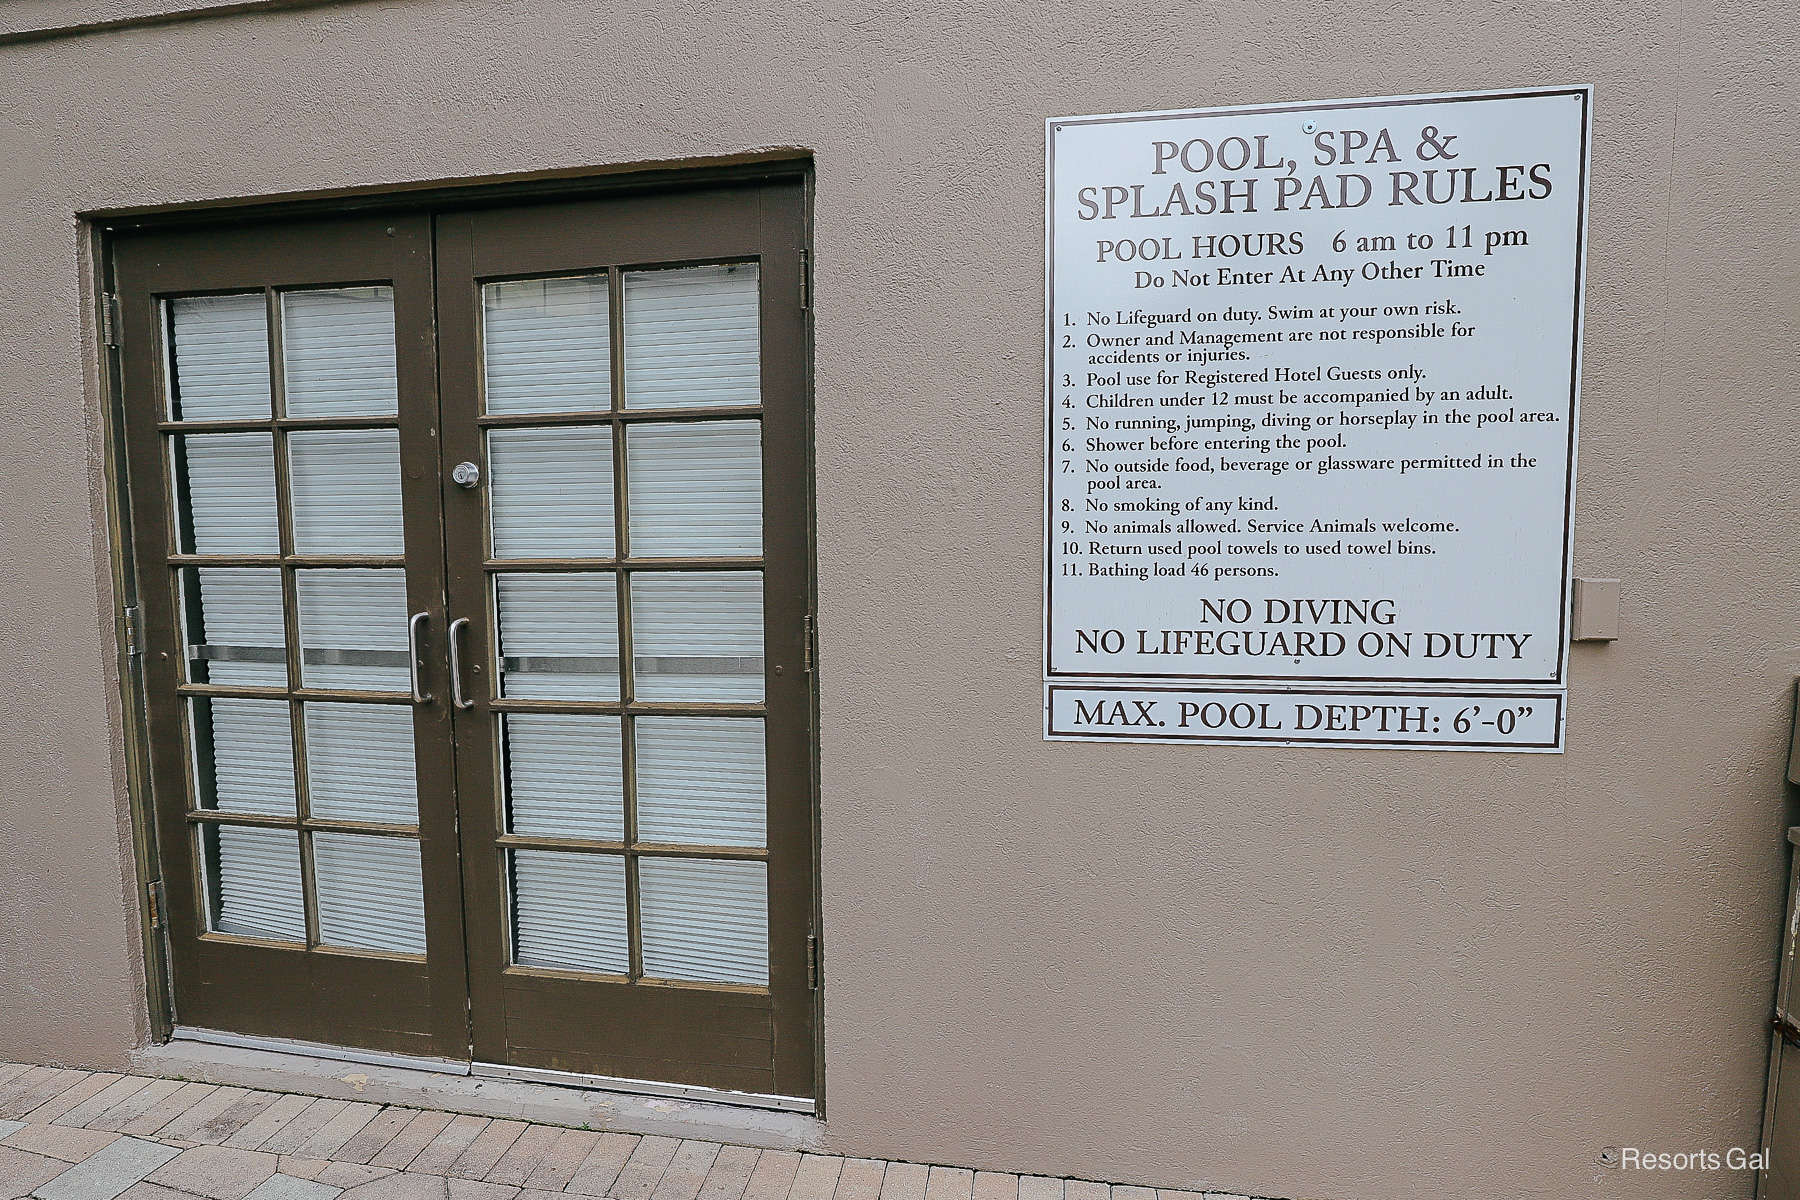 a posted set of rules and hours for guests using the pool area 